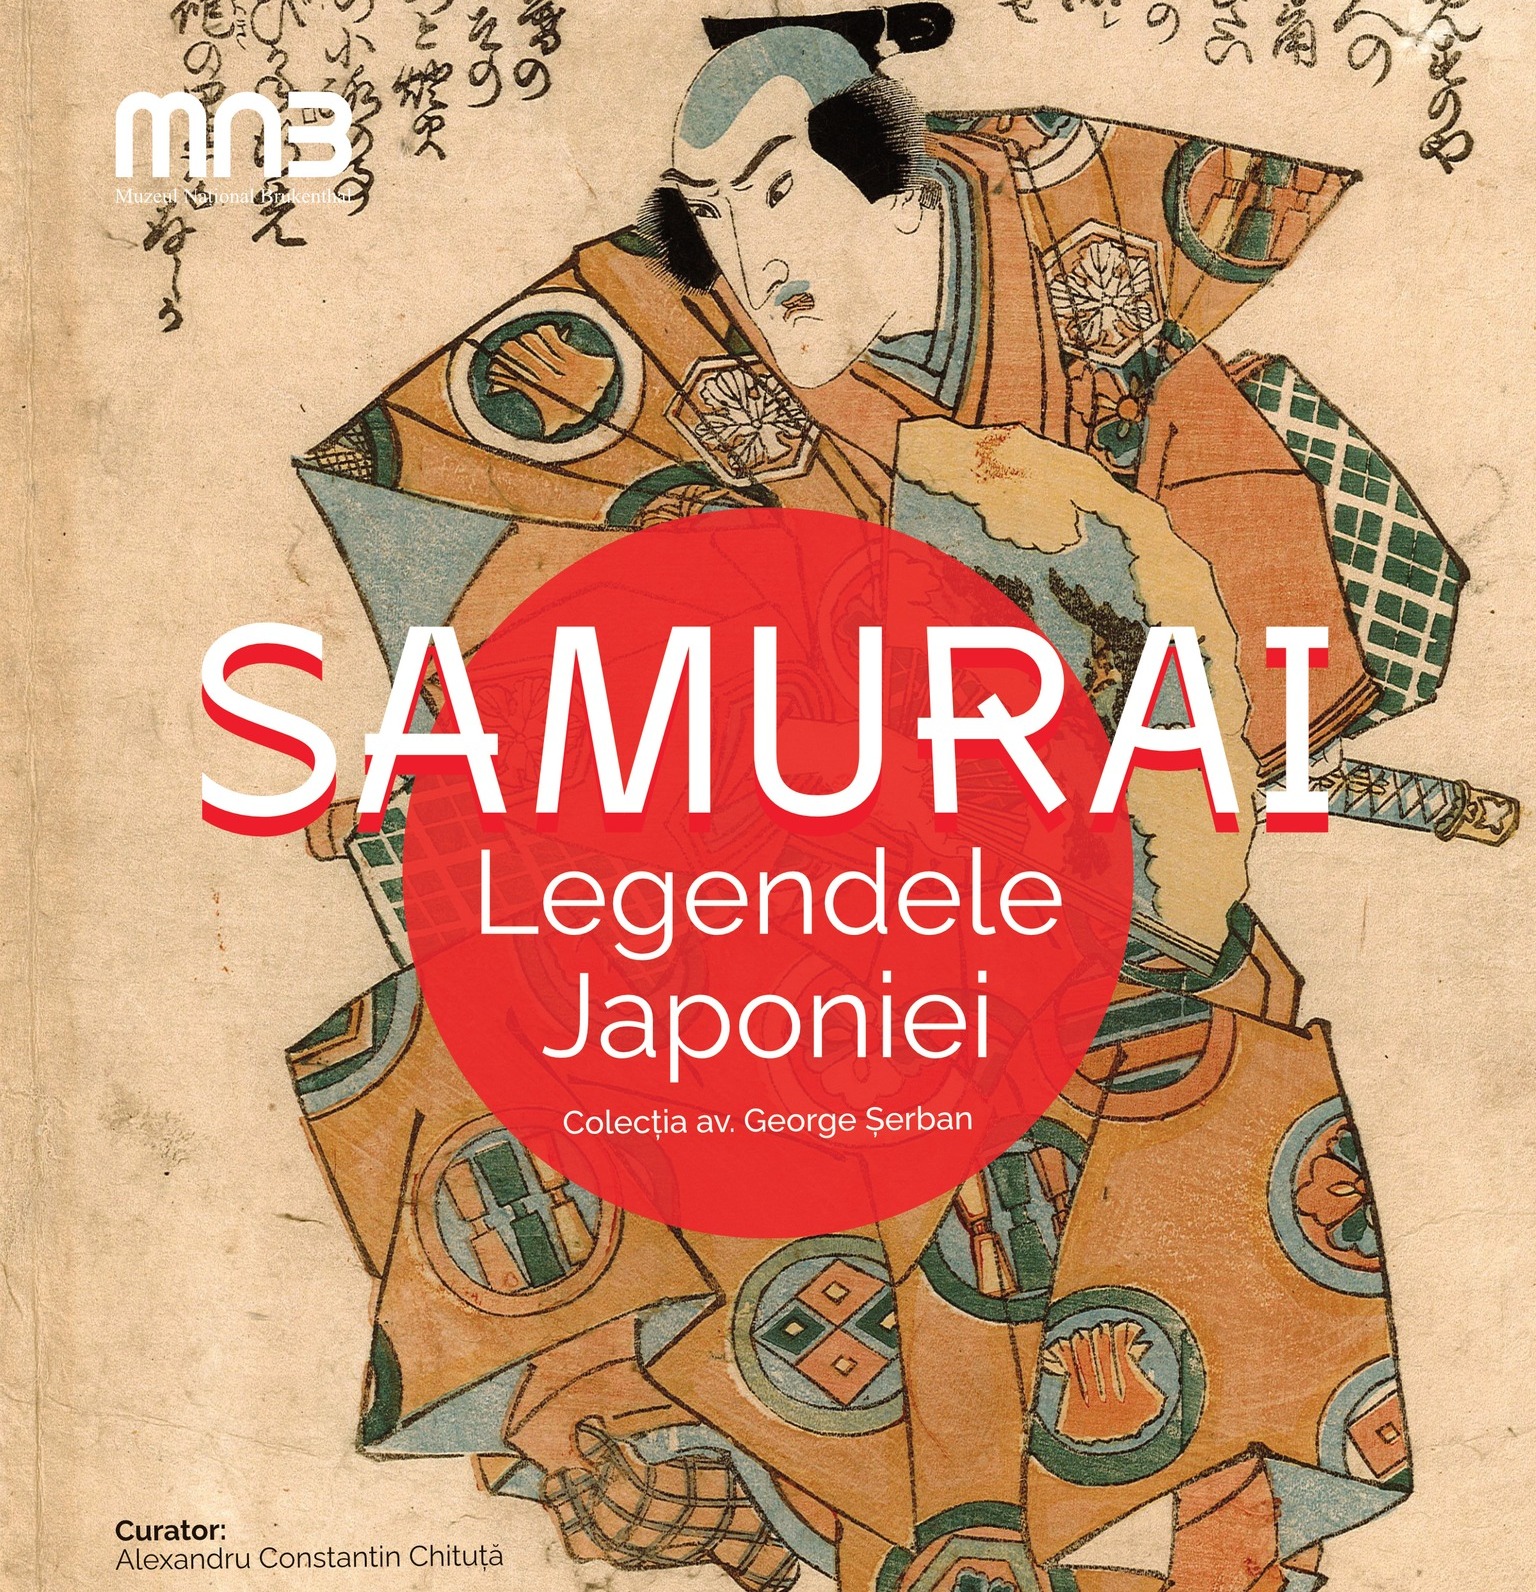 Central Romania: Sibiu’s Brukenthal Museum to hold exhibition of Japanese prints and samurai statues